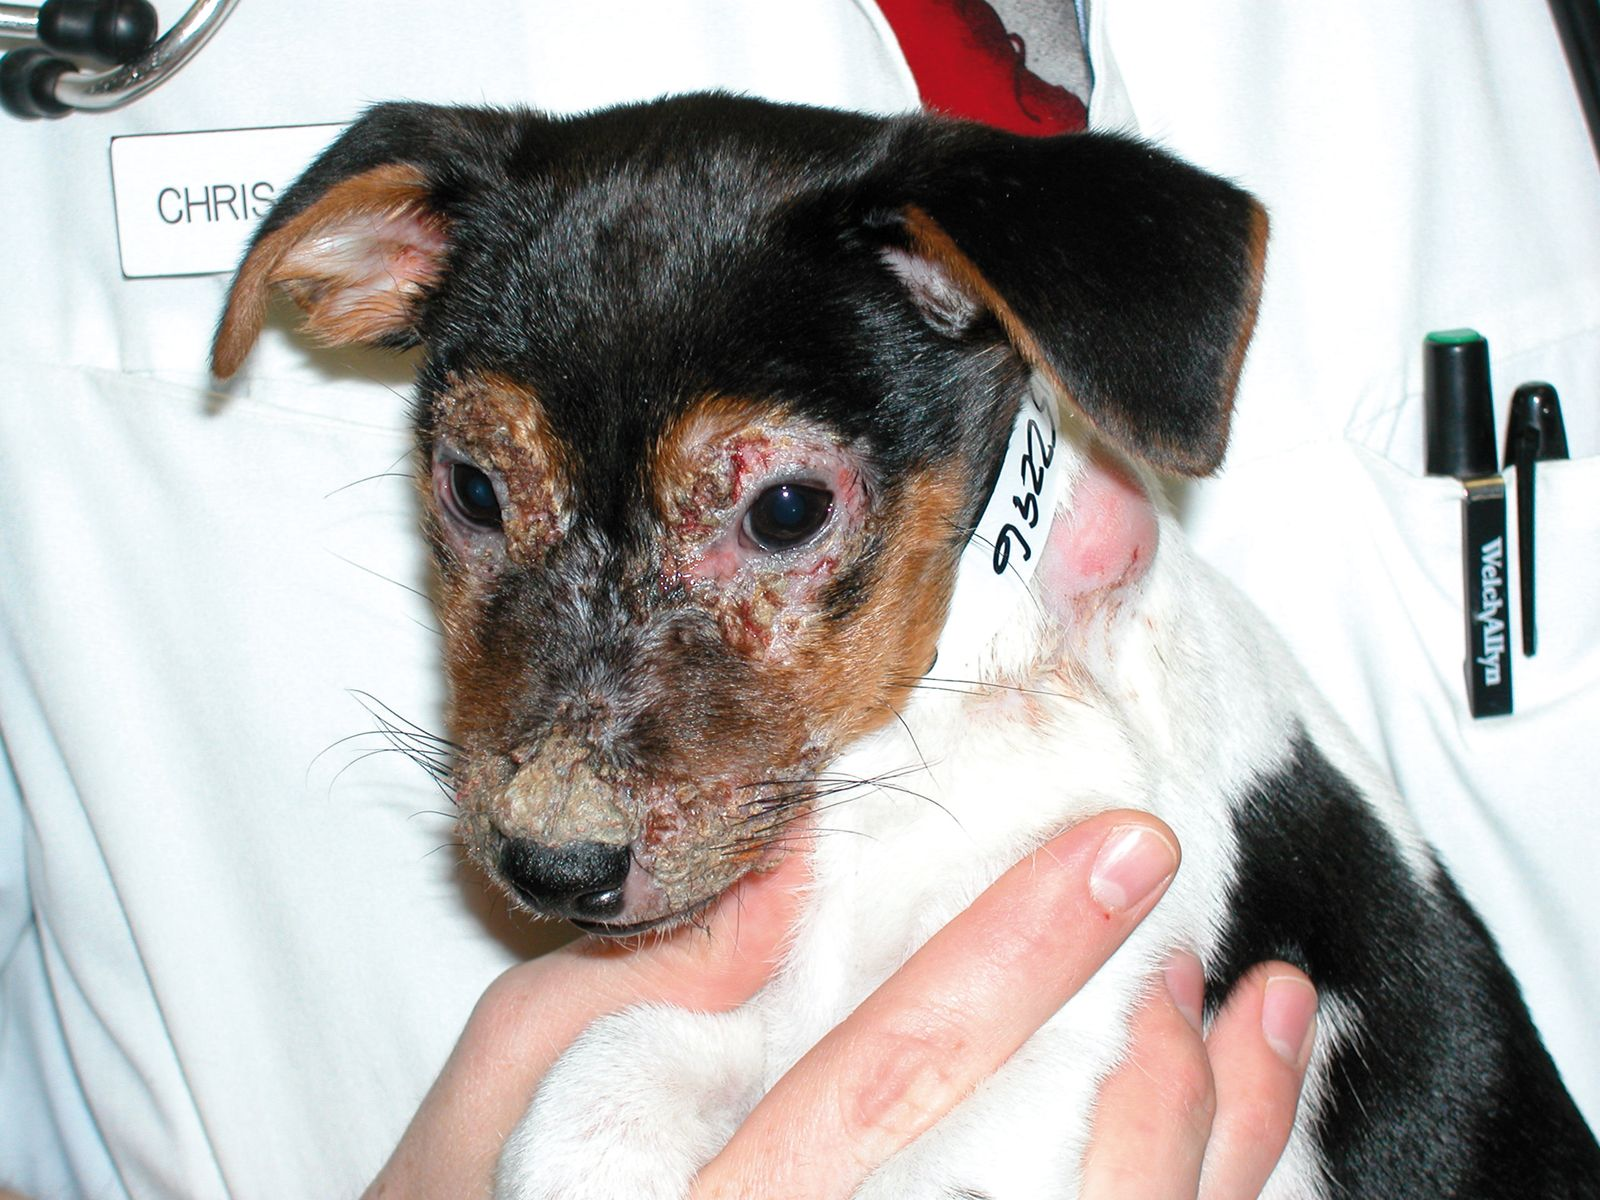 Crust and Erosion on puppy's face, Juvenile cellulitis